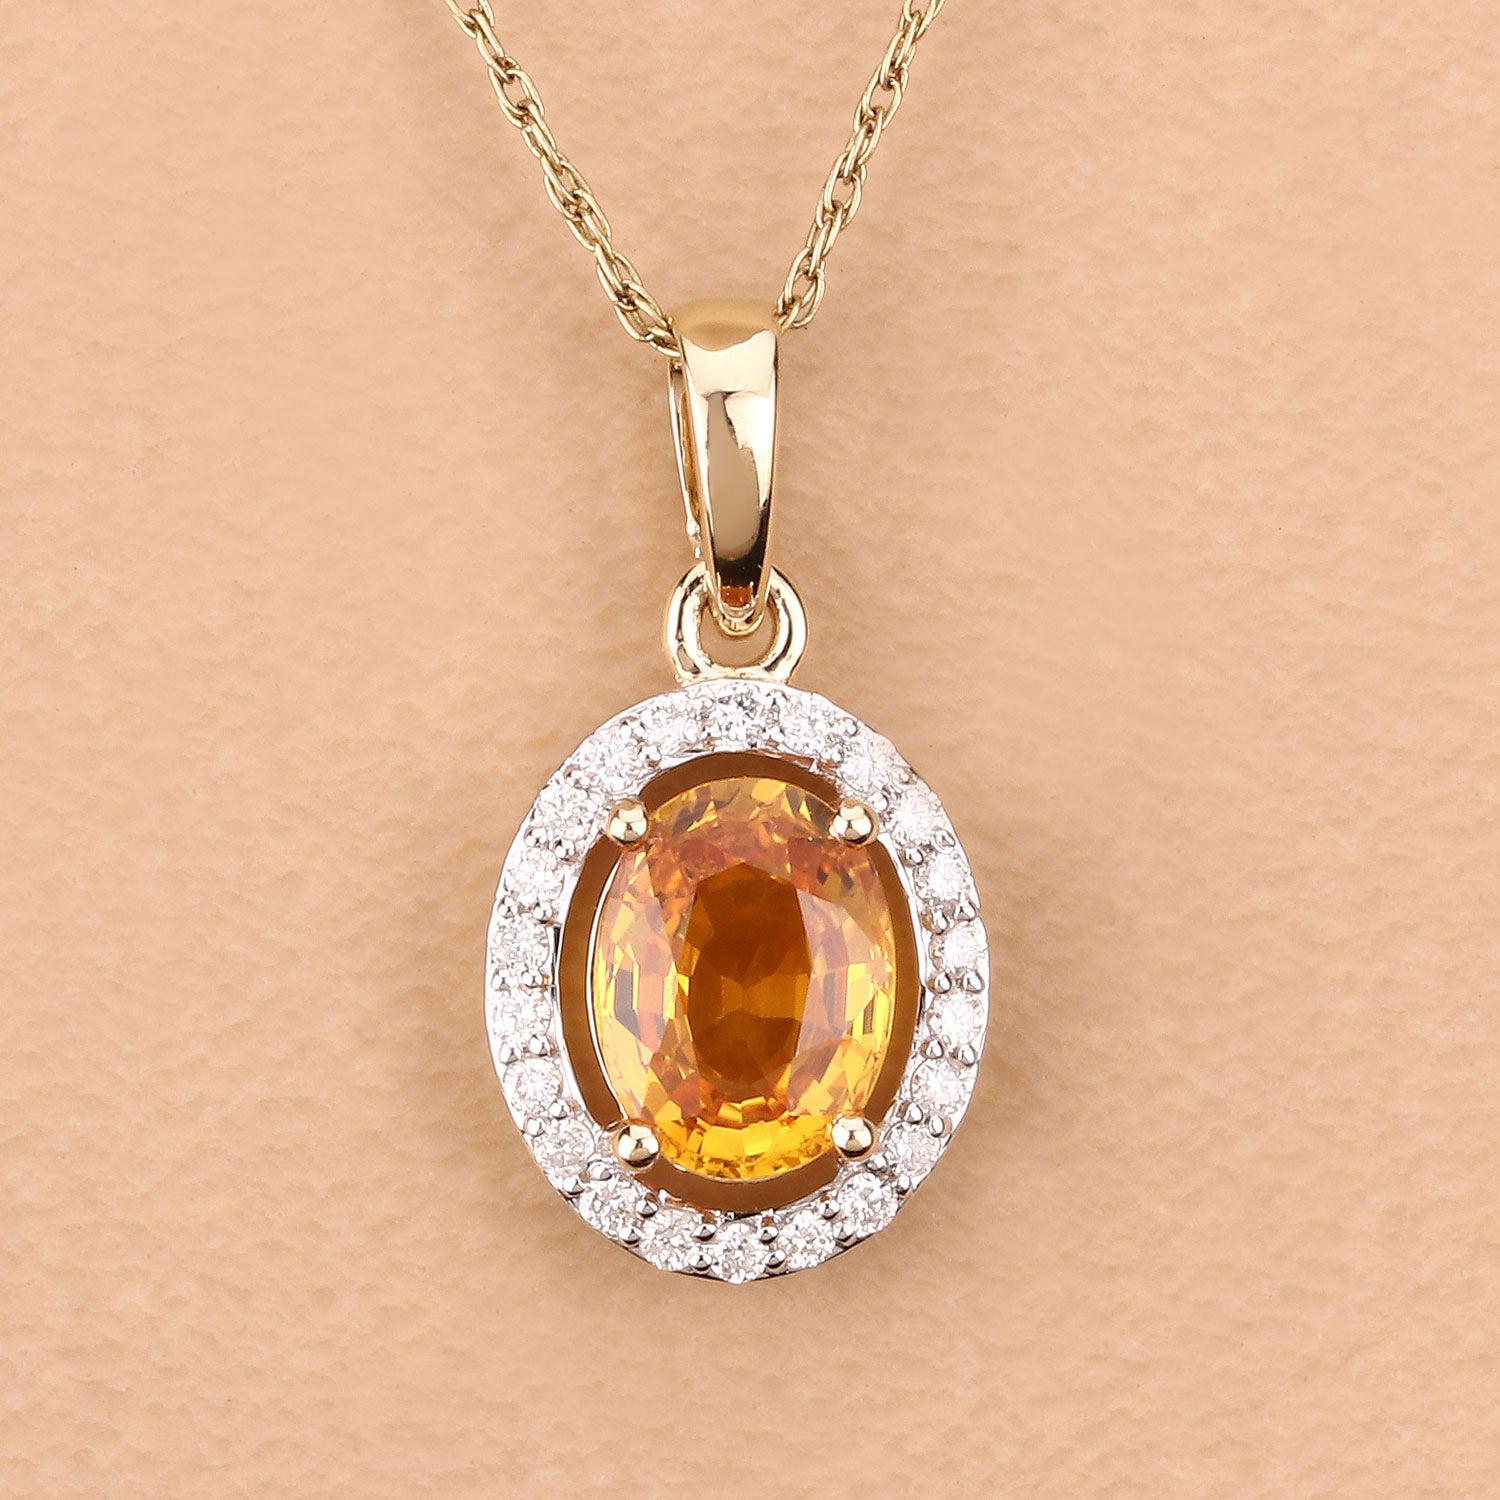 It comes with the appraisal by GIA GG/AJP
Sapphire = 1.60 Carat ( 8 x 6 mm )
Cut: Oval
Total Quantity of Sapphire: 1
Primary Stone Color: Yellow
Diamonds = 0.20 Carats
Total Quantity of Diamonds: 22
Metal: 14K Yellow Gold
Dimensions: 20 x 10.5 x 5 mm